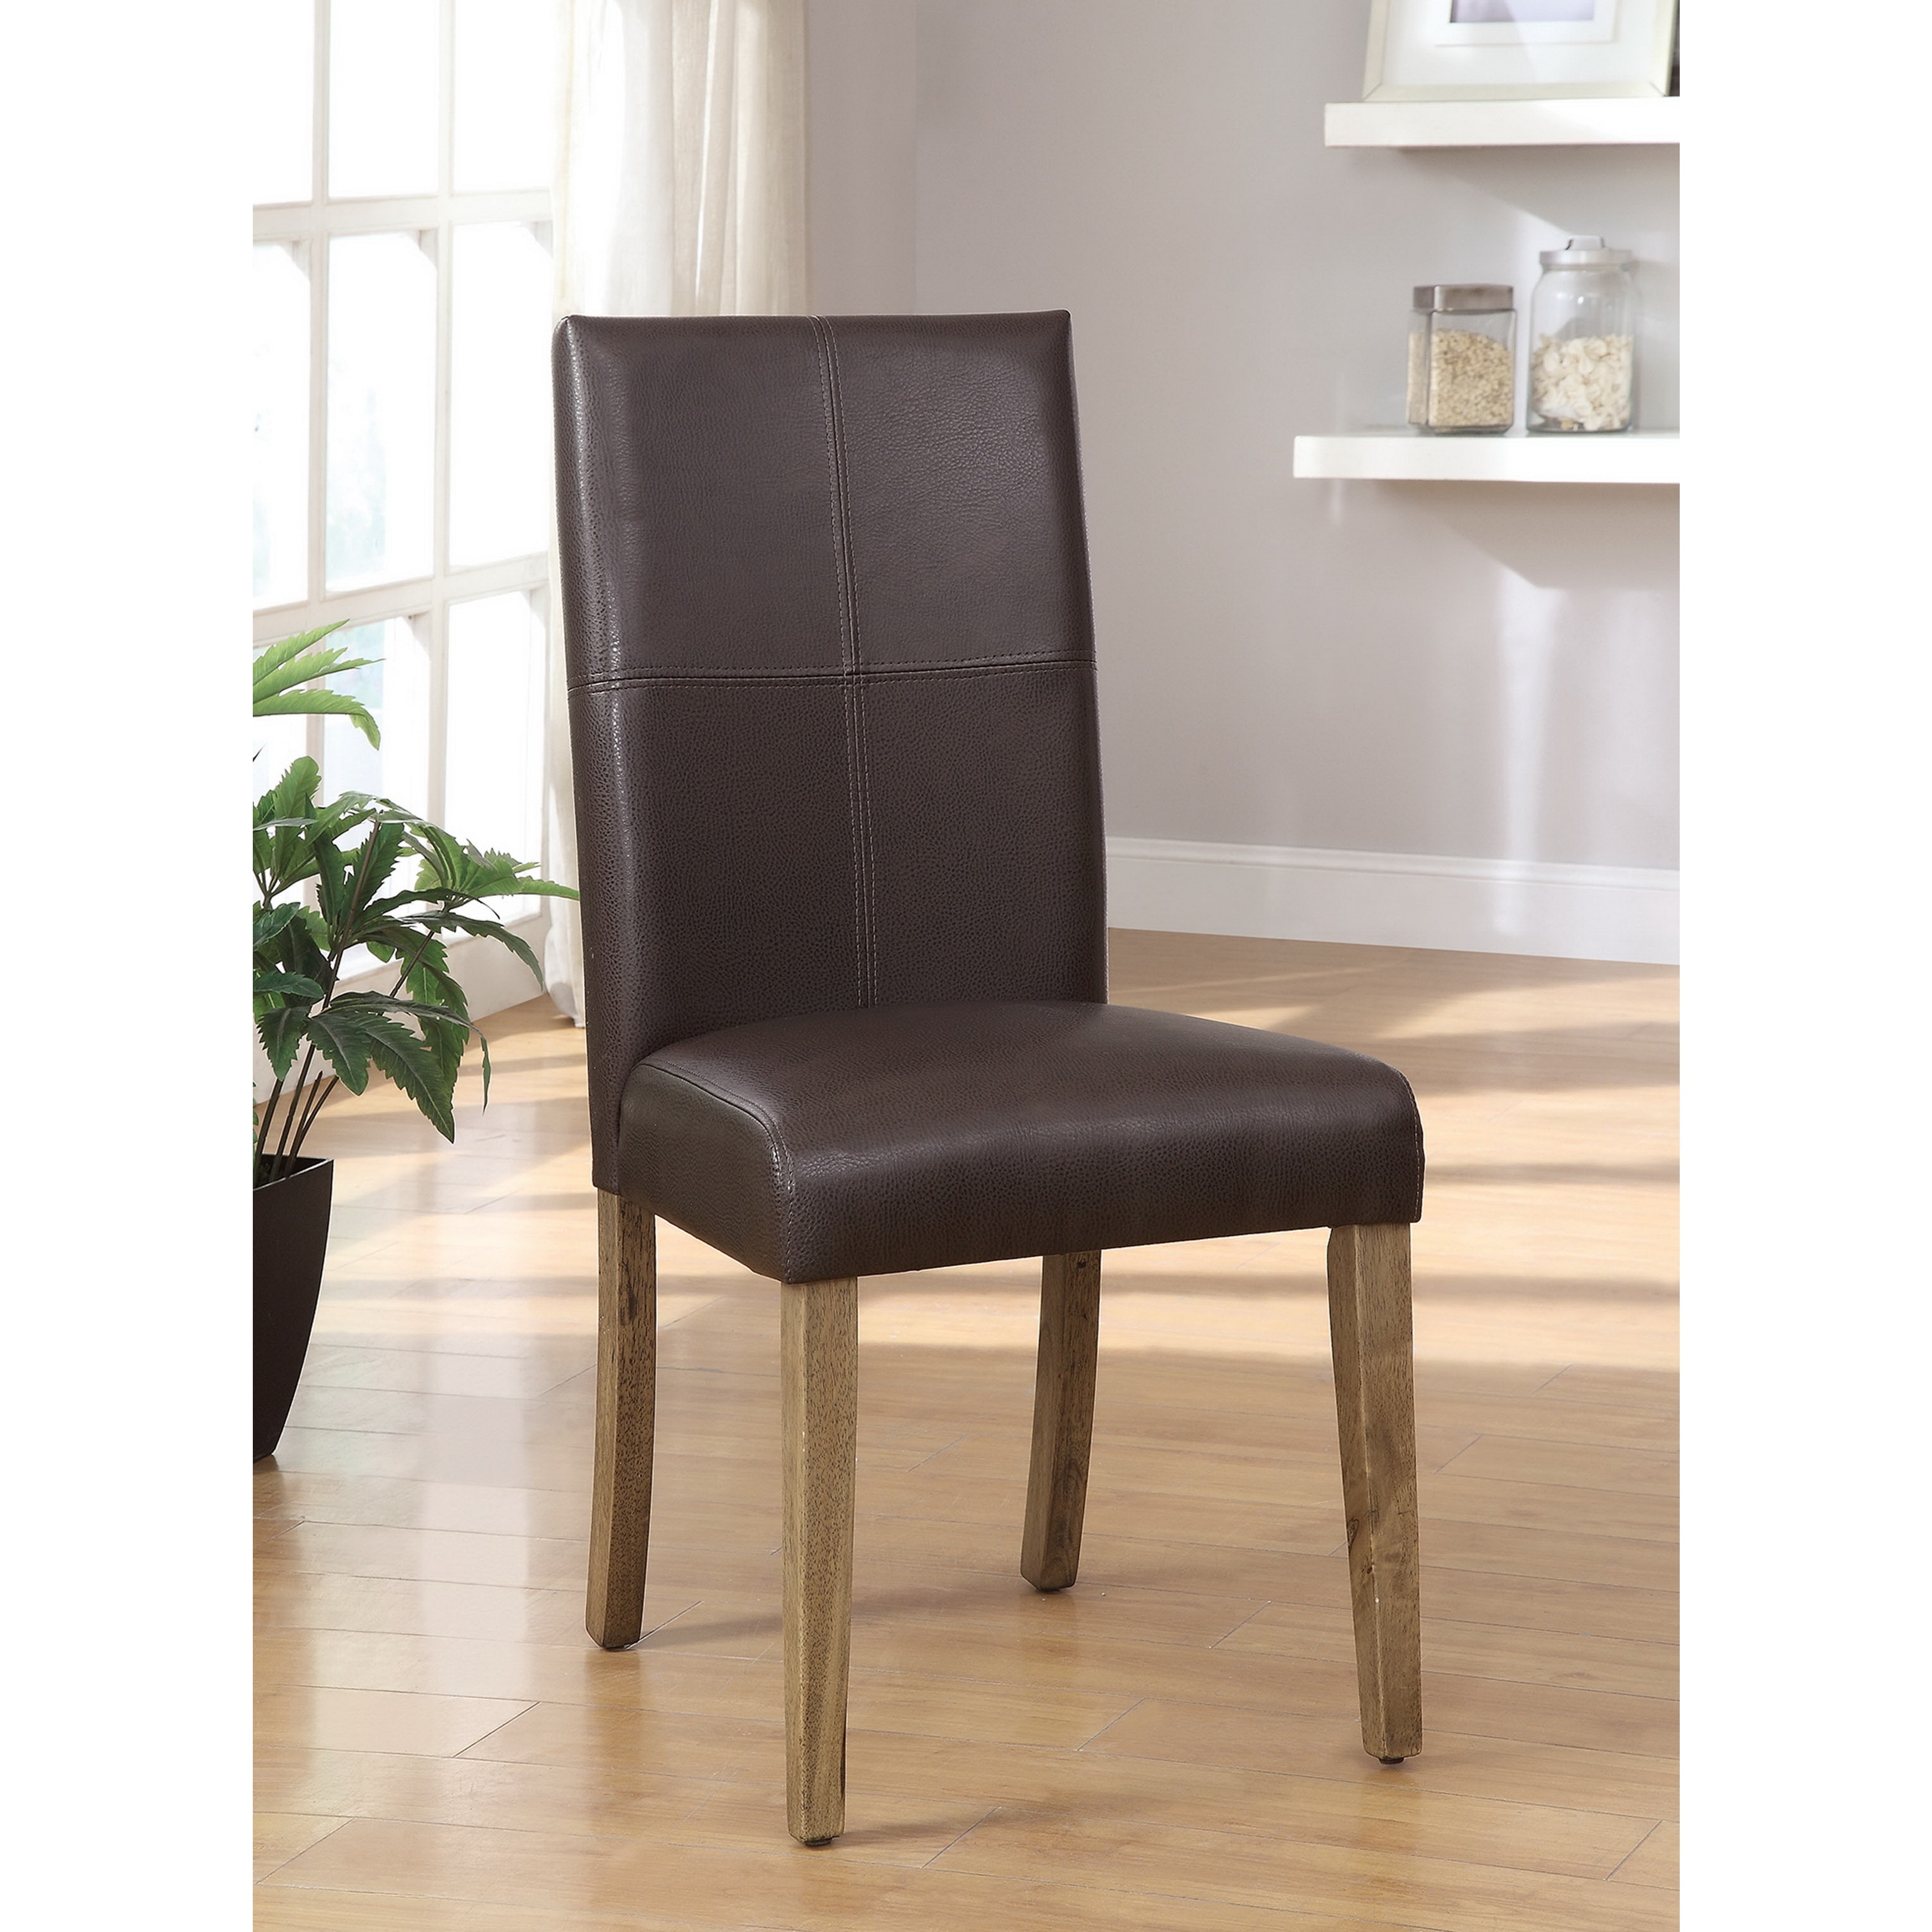 Furniture Of America Seline Dark Brown Leatherette Dining Chairs (set Of 2)